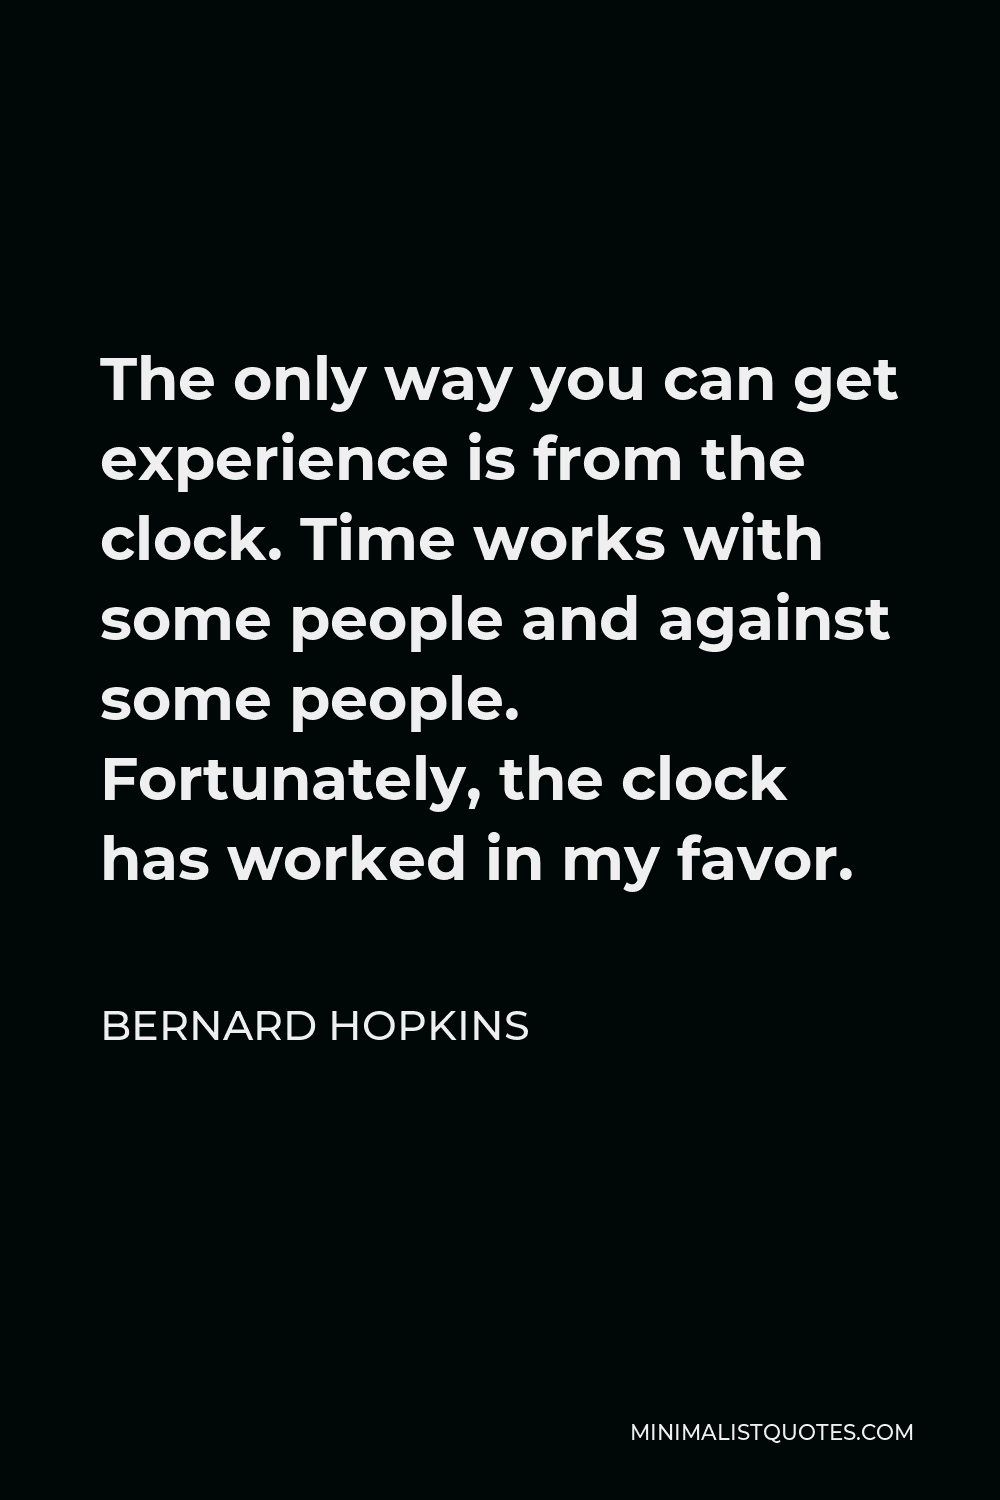 Bernard Hopkins Quote - The only way you can get experience is from the clock. Time works with some people and against some people. Fortunately, the clock has worked in my favor.